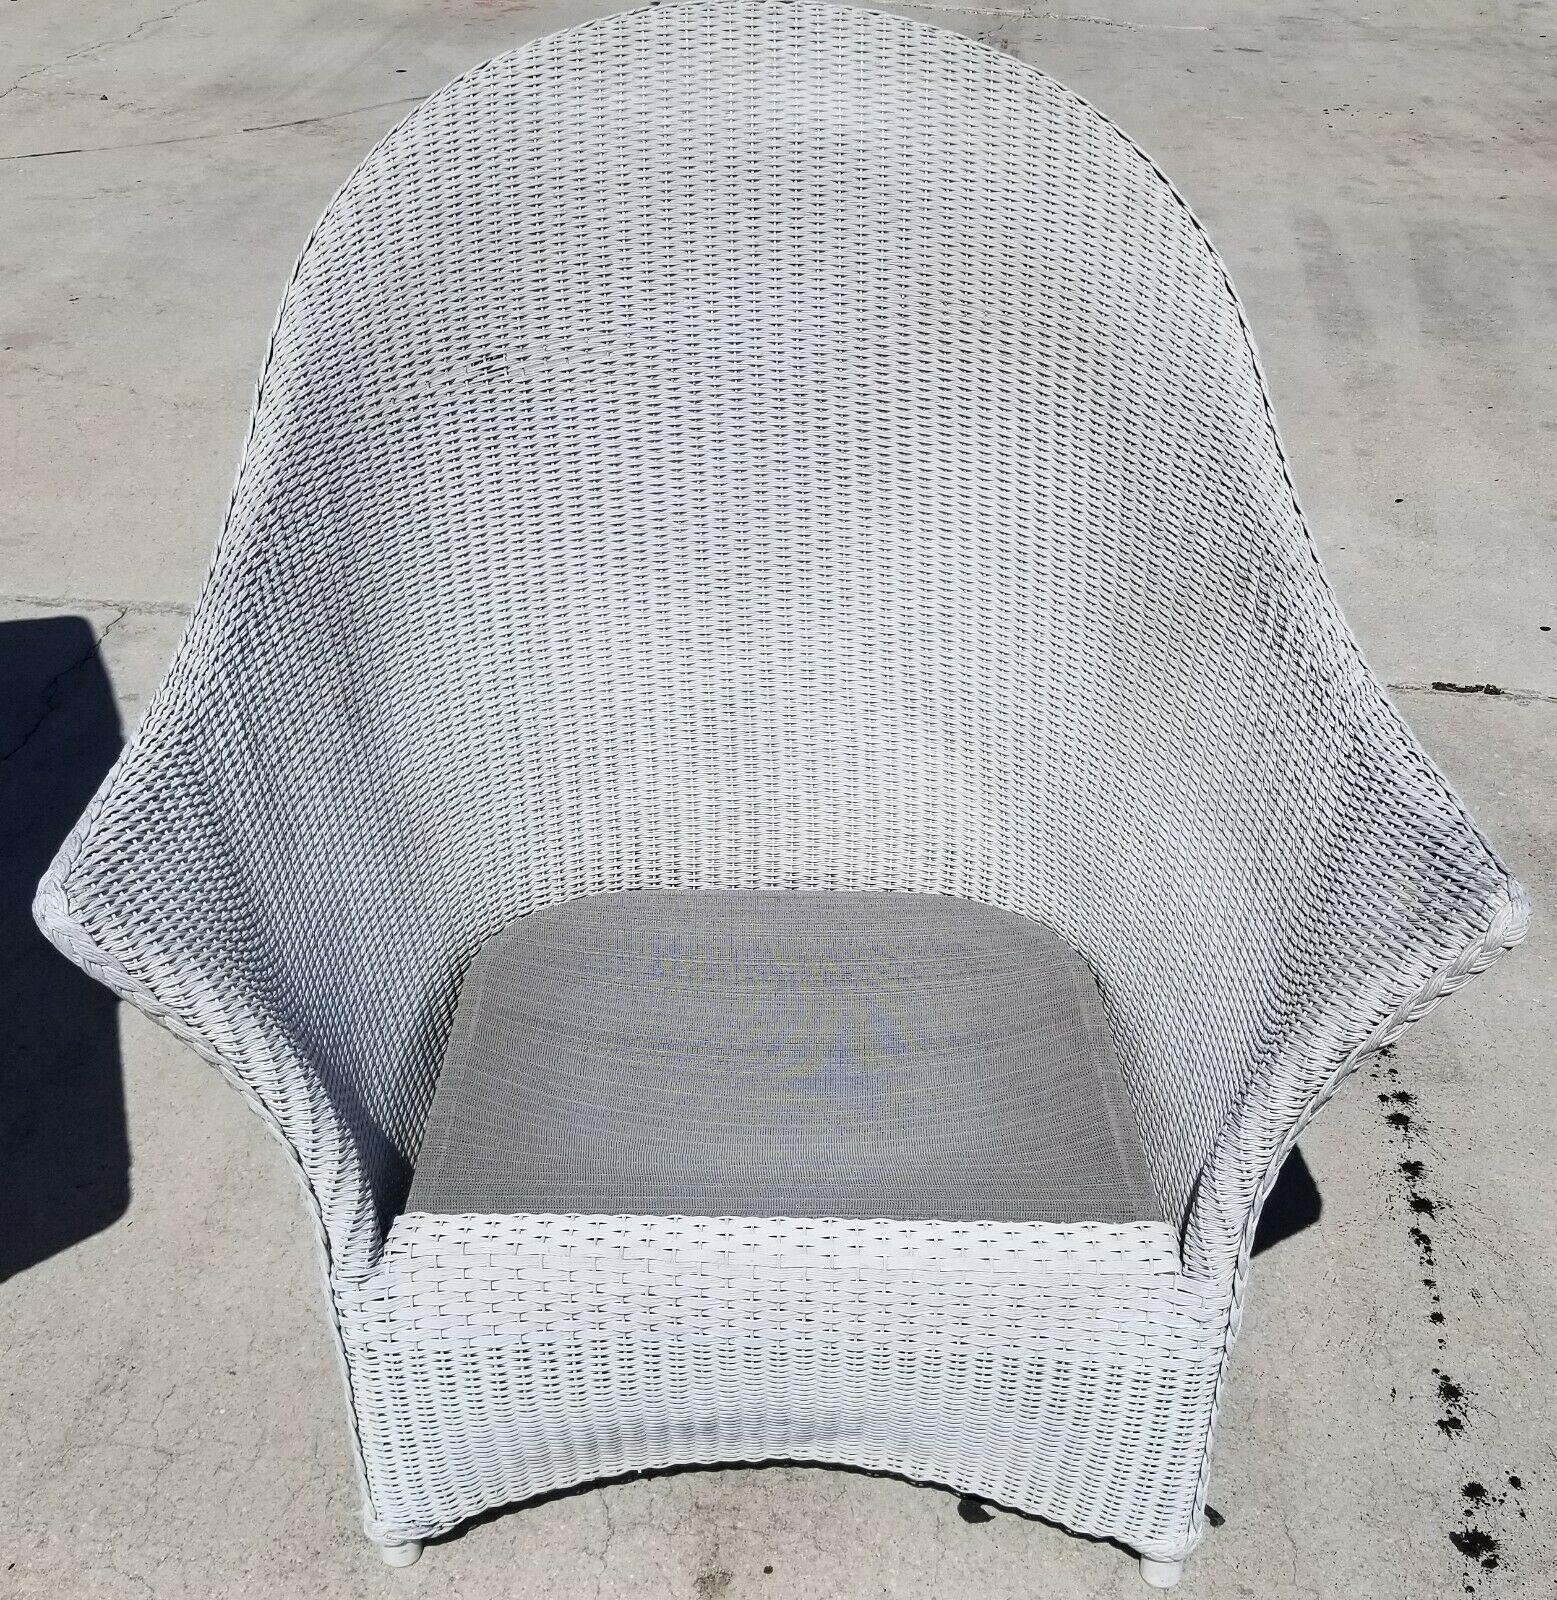 English Garden Loom Wicker Oversized Lounge Chairs by Lloyd Flanders, Set of 2 In Good Condition For Sale In Lake Worth, FL